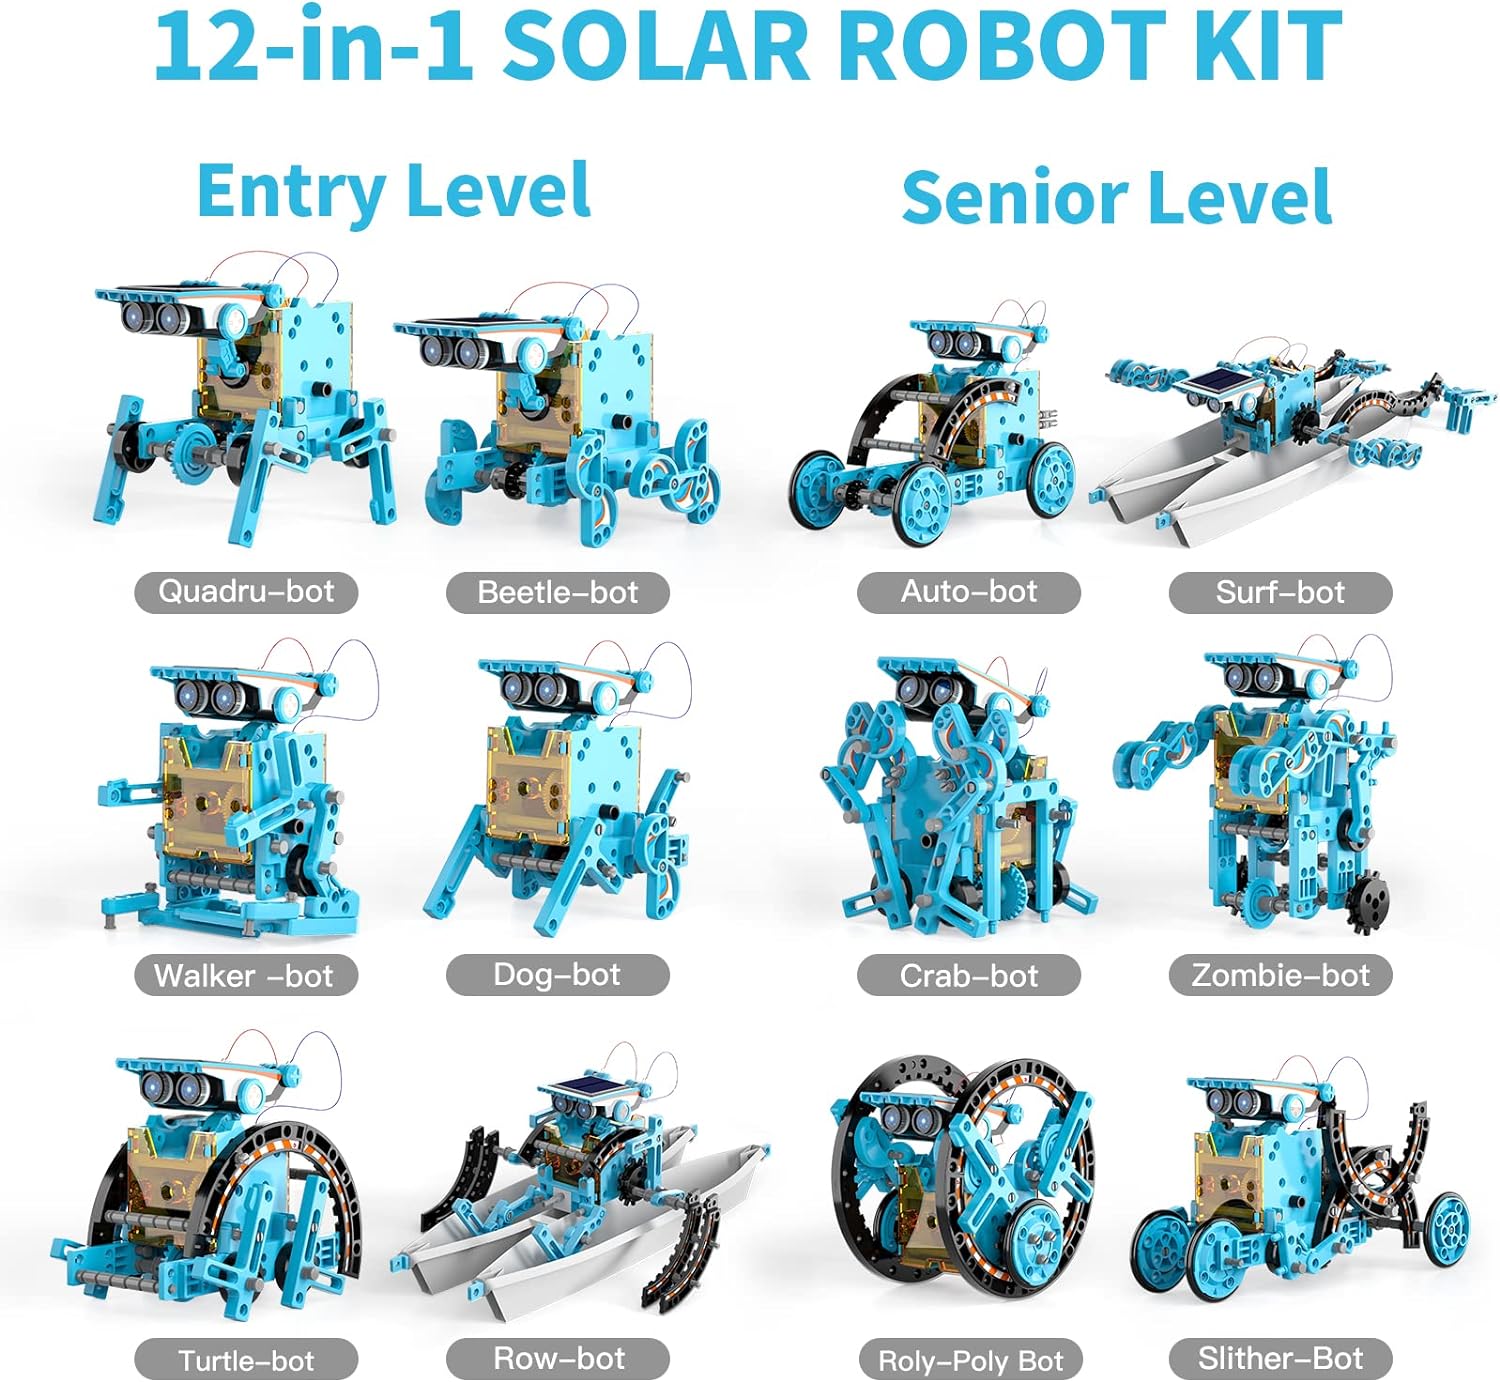 Lucky Doug 12-in-1 STEM Solar Robot Kit Toys Gifts, Educational Building Science Experiment Set